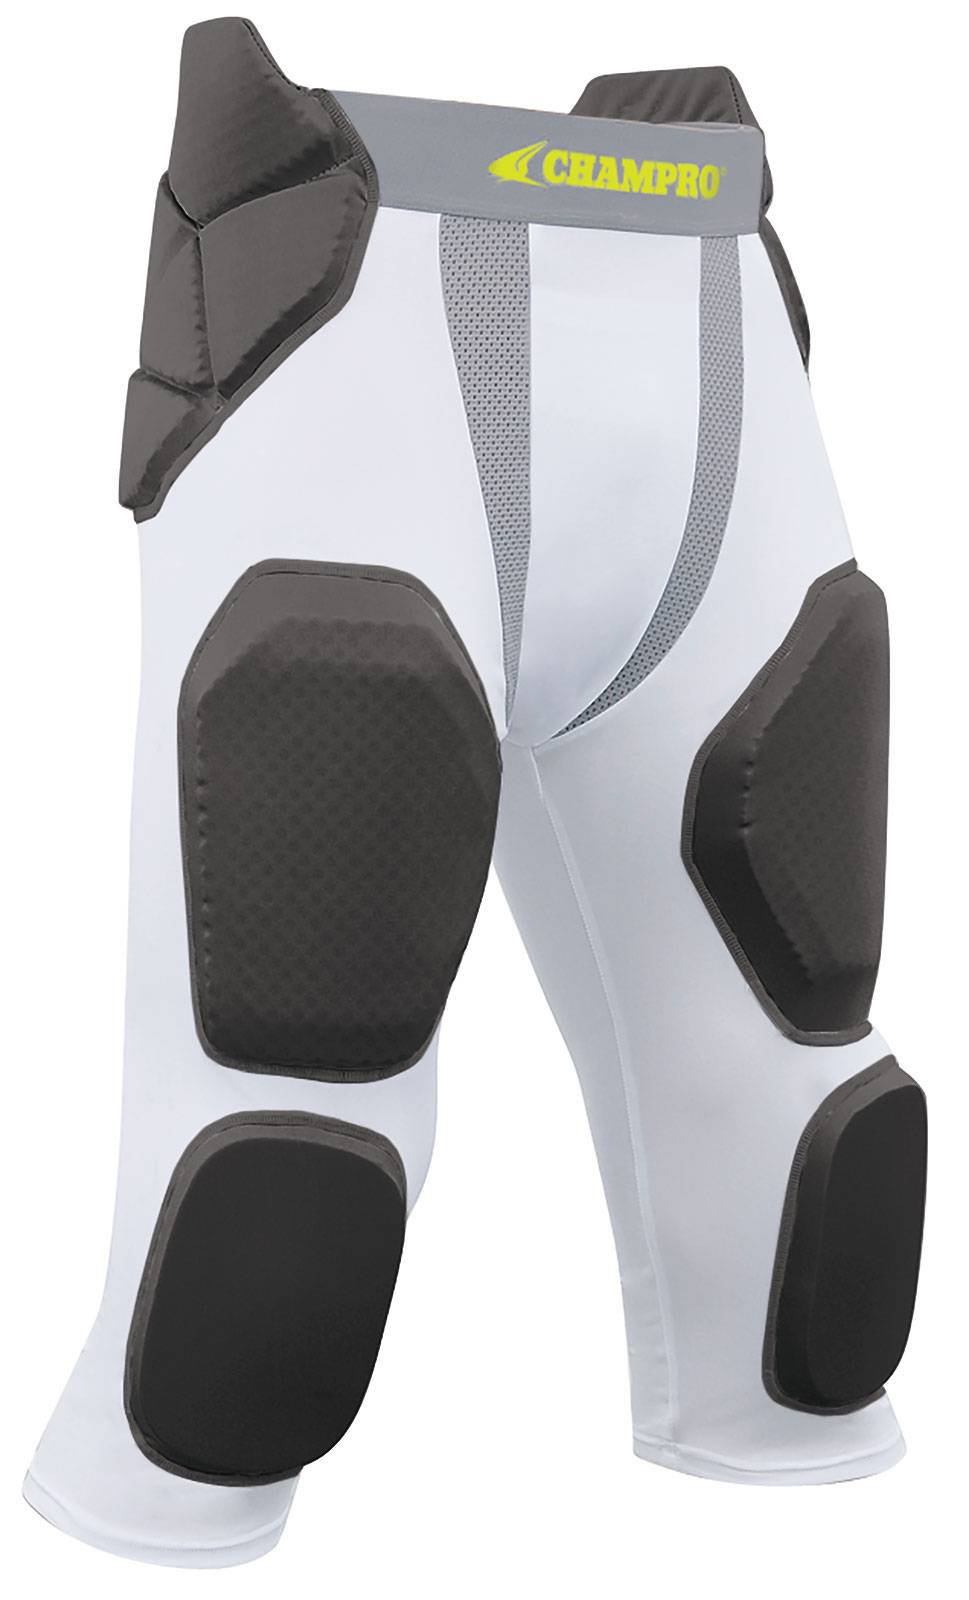 Flex Thigh Pads Sports Unlimited Adult 7 Pad Integrated Football Girdle